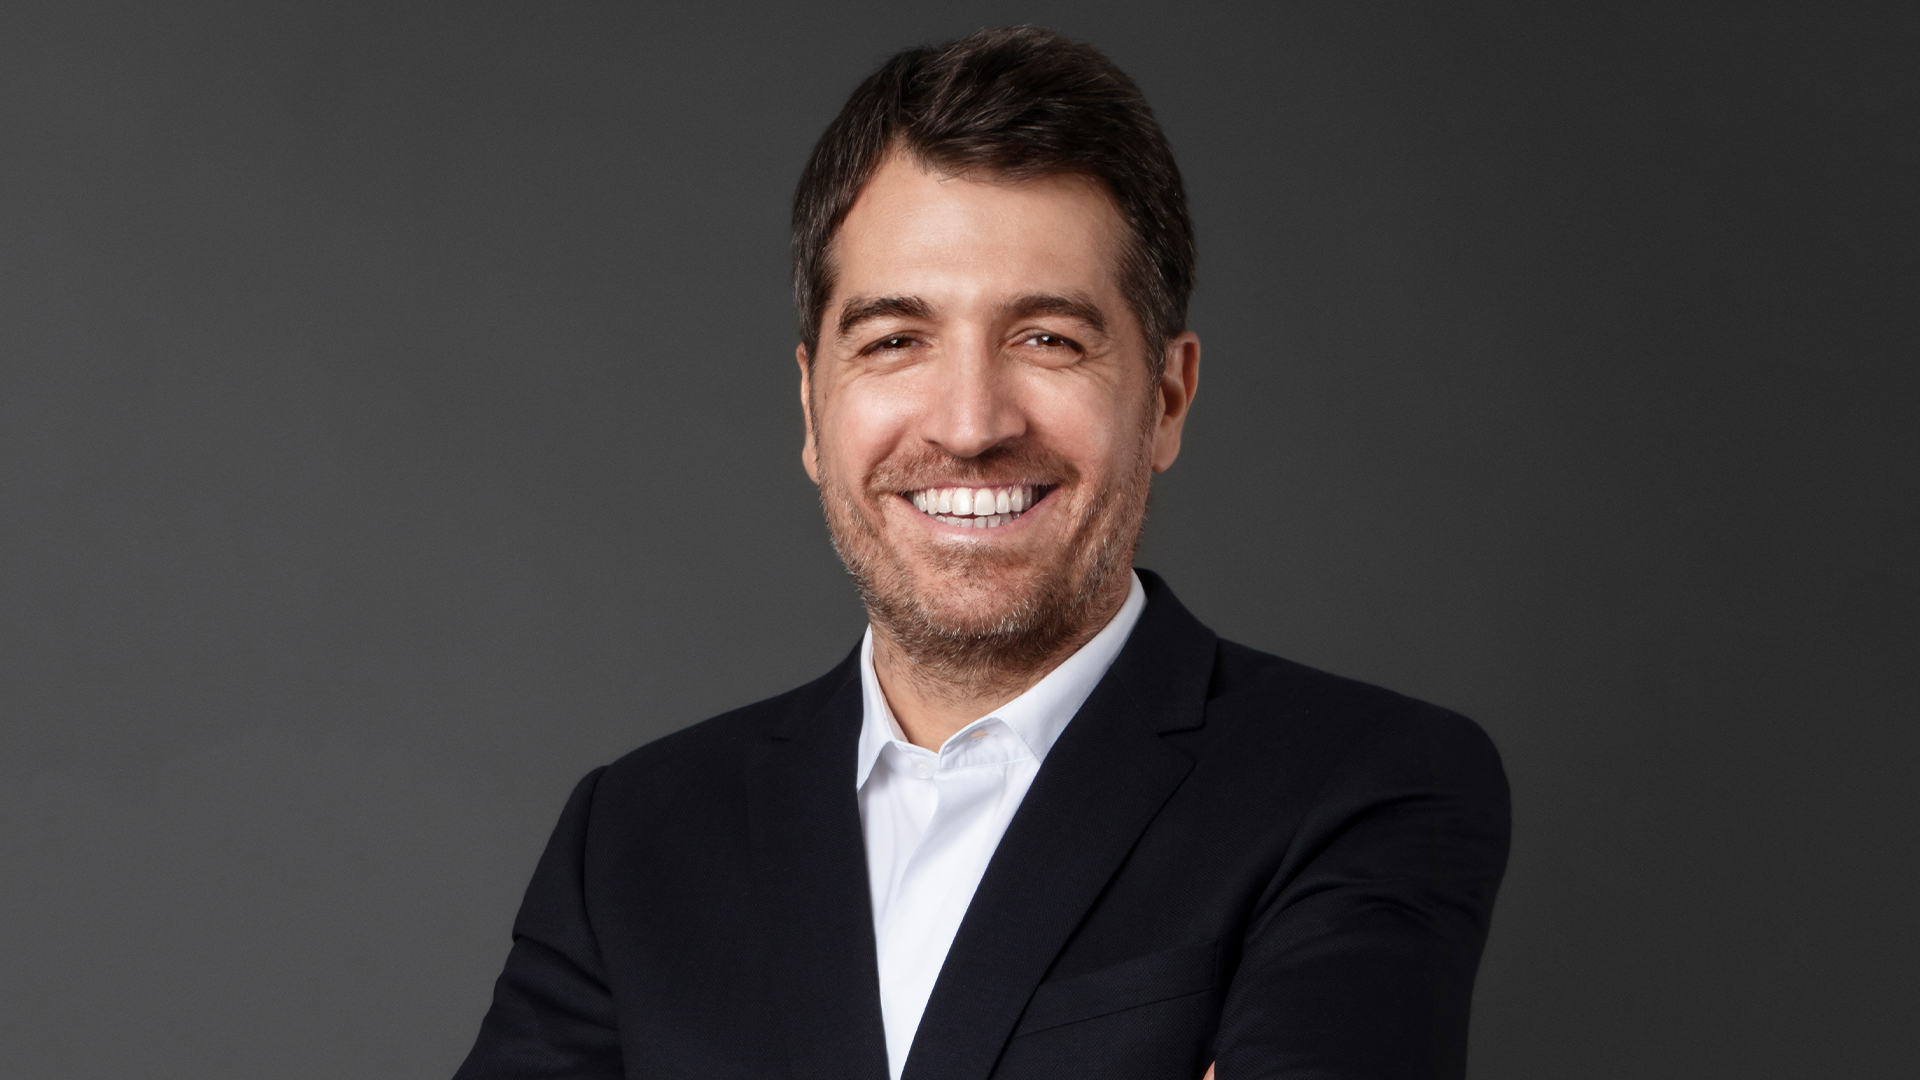 The Interview: Marc Chaya, Co-founder & CEO of Maison Francis